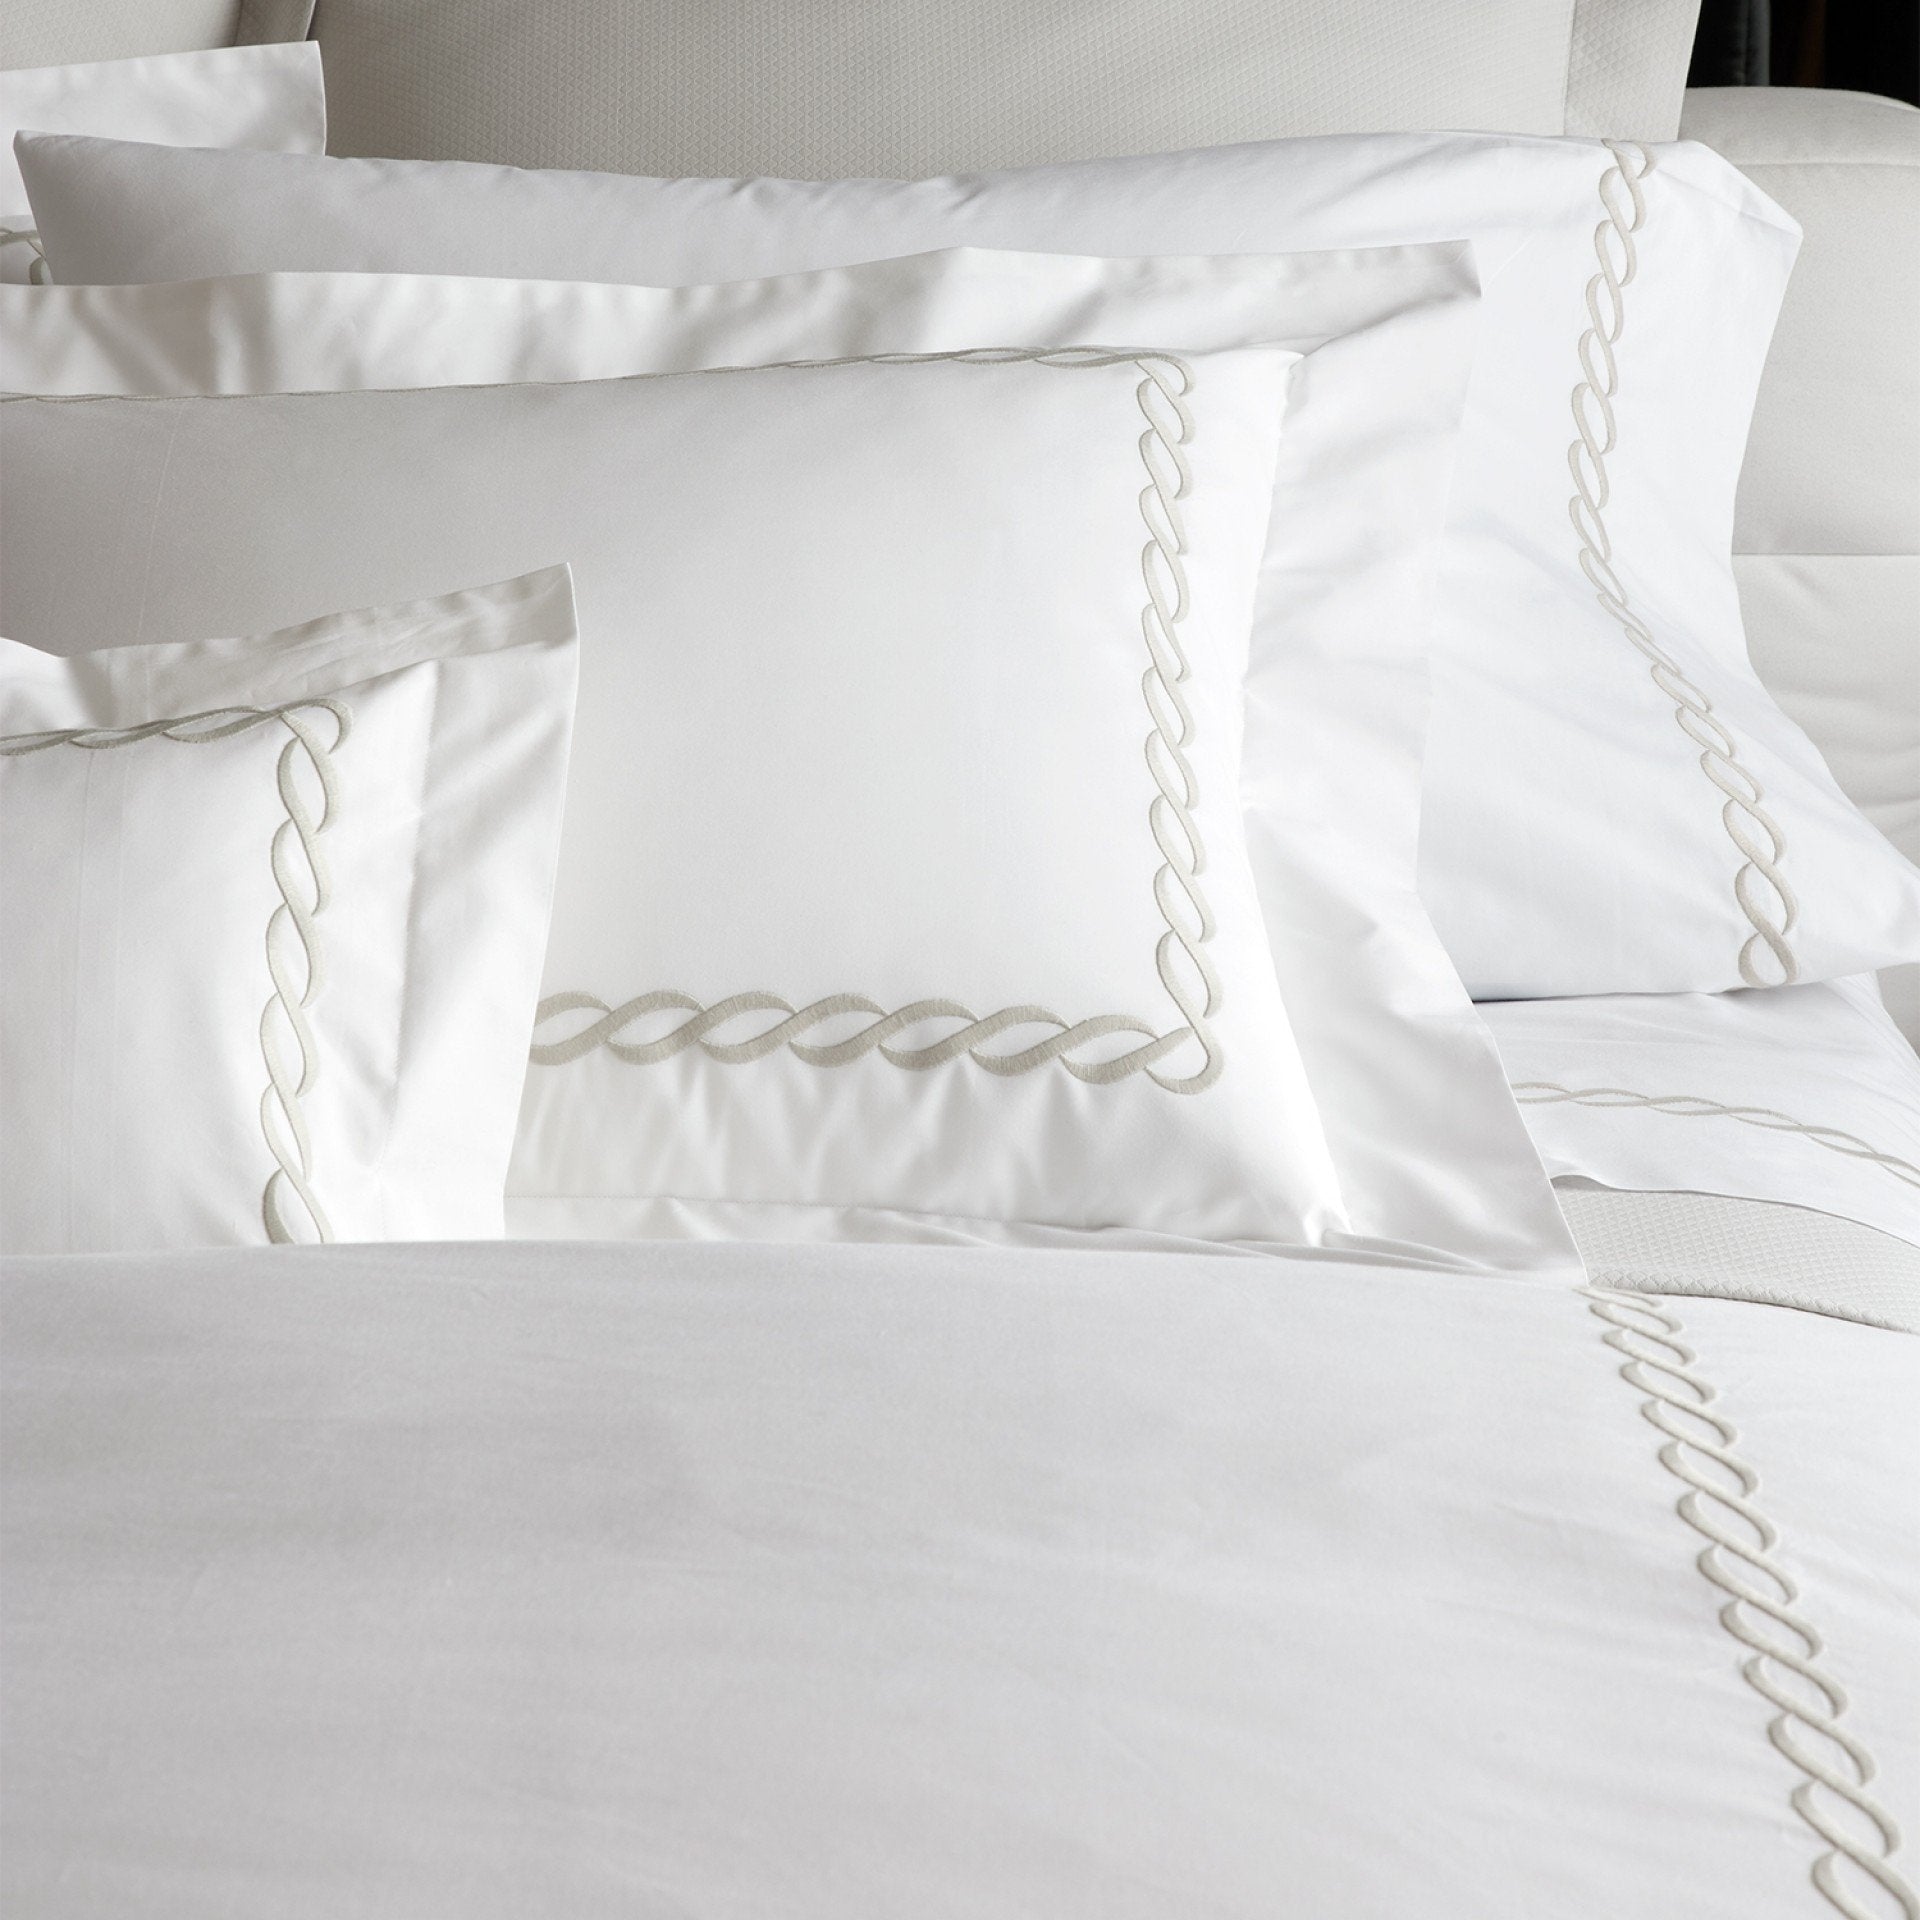 Matouk Luxury Bedding - Classic Chain Sheets and cases - Fig Linens